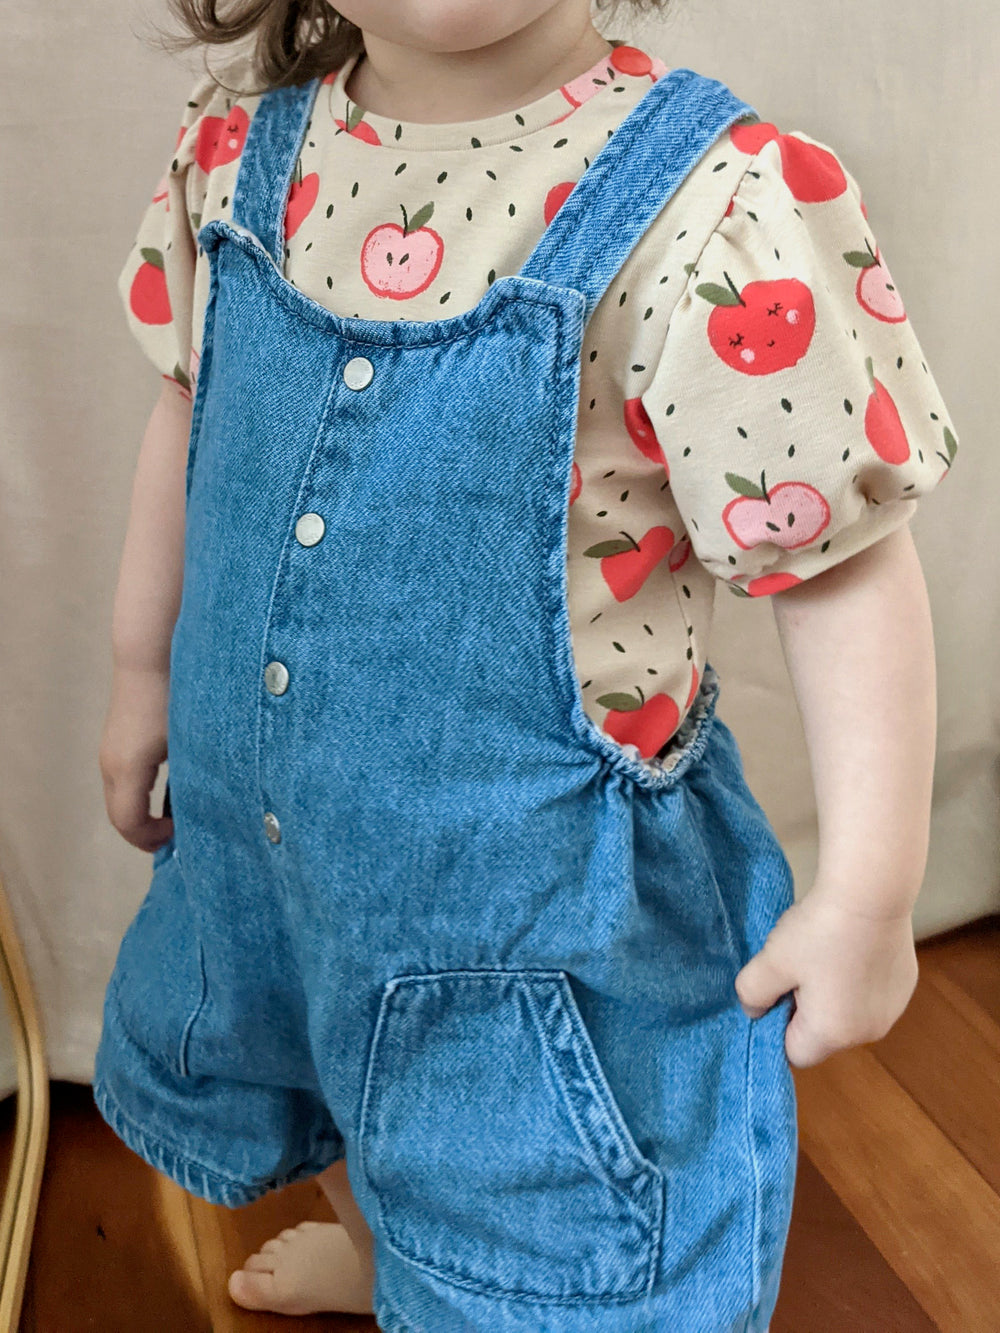 Child wearing the Baby/Child Nuage Mini Balloon Sleeve Shirt sewing pattern from Camimade on The Fold Line. A t-shirt pattern made in light to medium weight knit fabrics, featuring short balloon sleeves, round neck and shoulder opening with snap fasteners